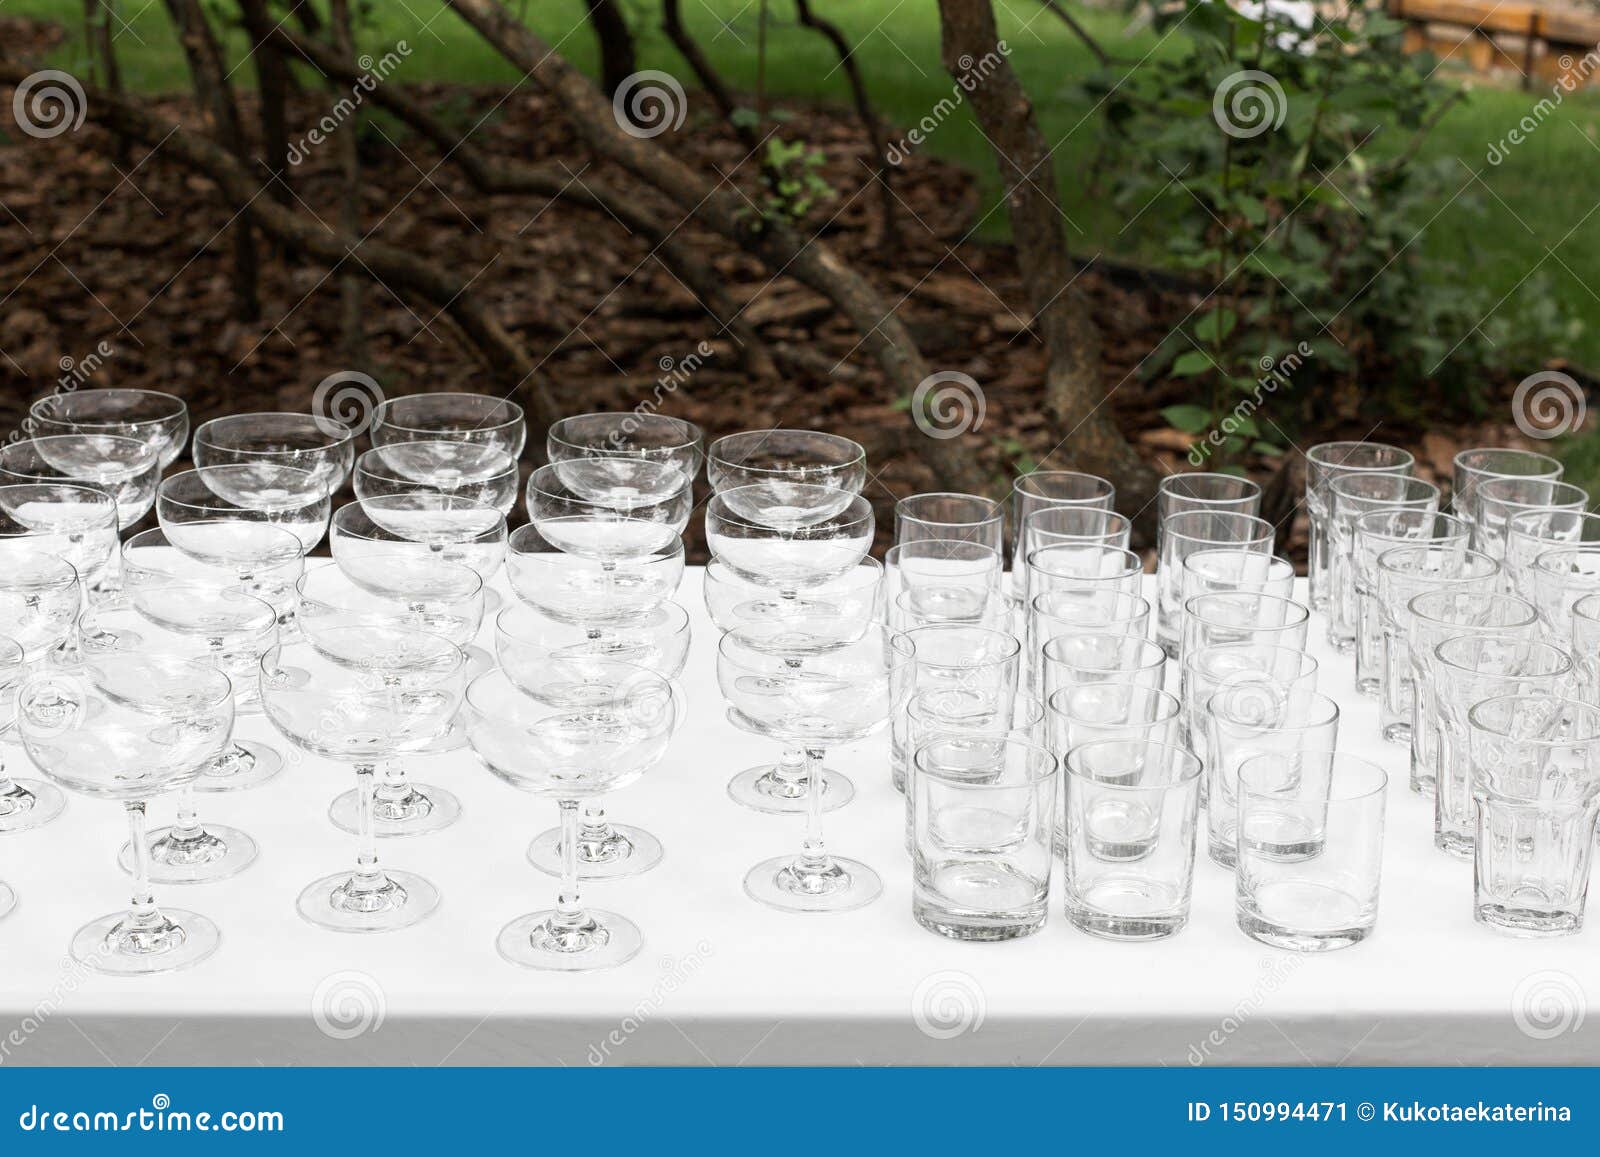 Many Empty Clean Glasses For Guests At The Buffet Festive Wedding Table Stock Image Image Of